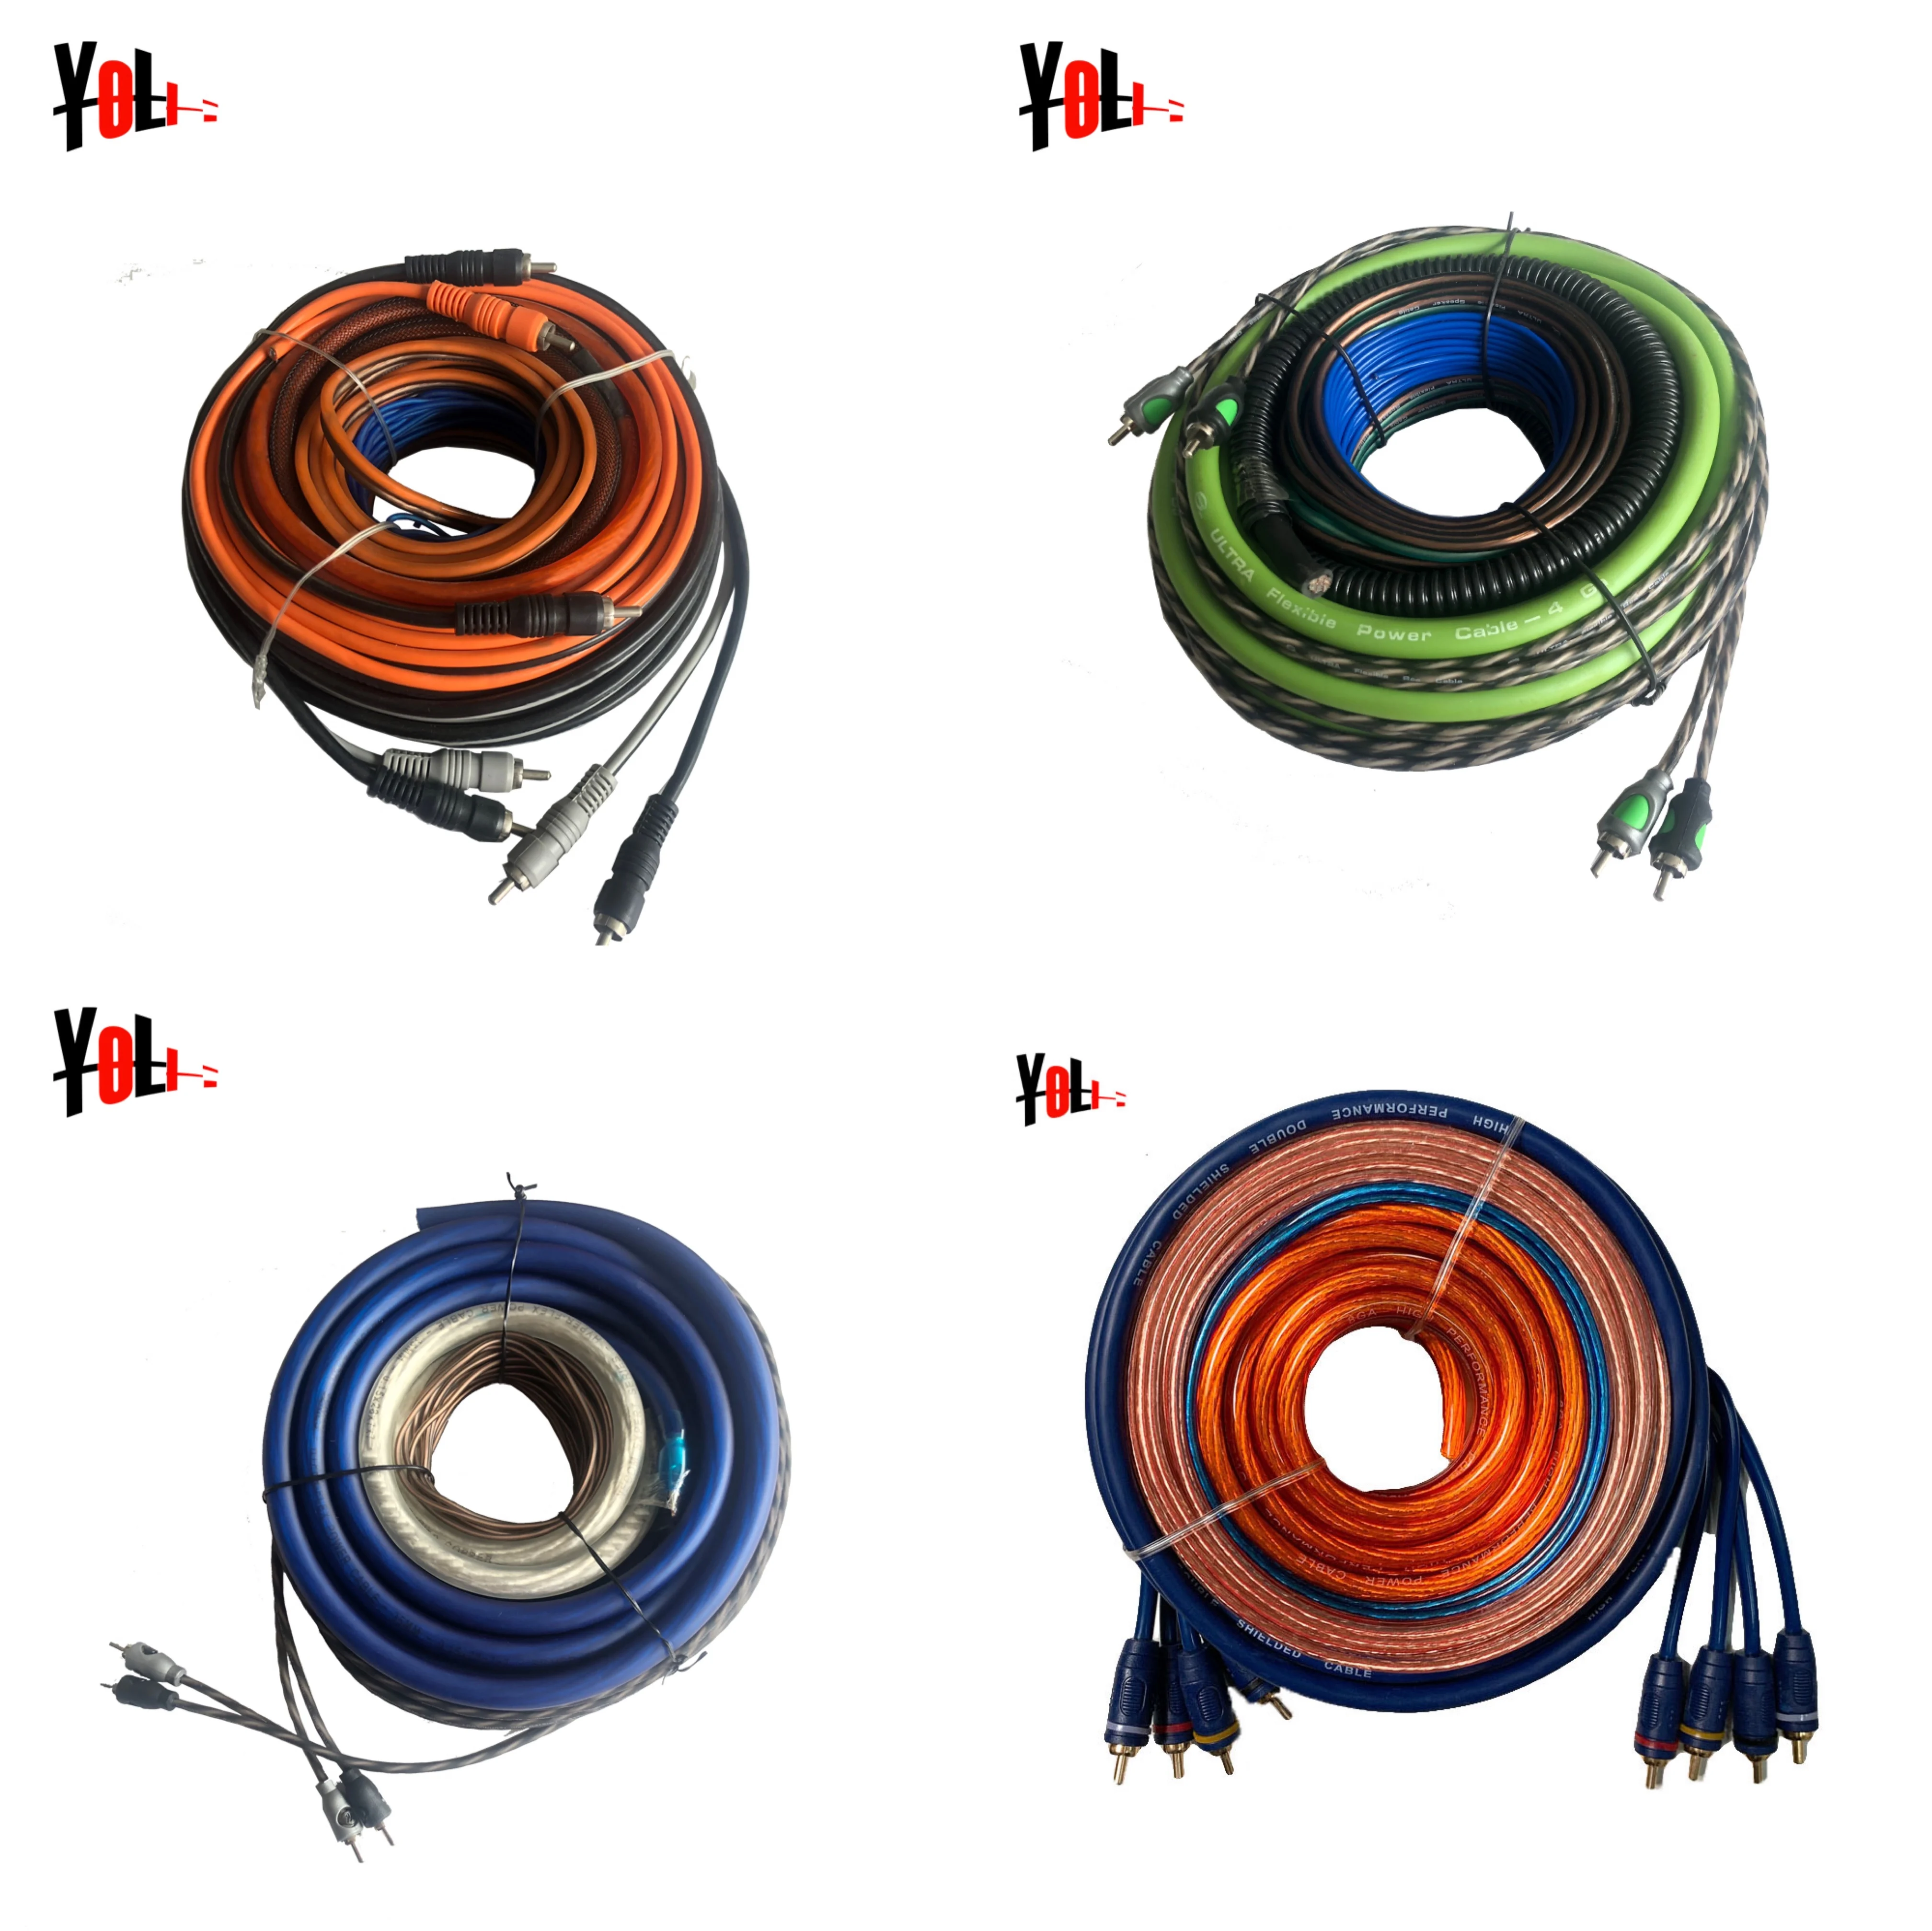 Popular 3000 vatio 4 AWG amp wiring kits with colorful cable amp wiring kit in stone